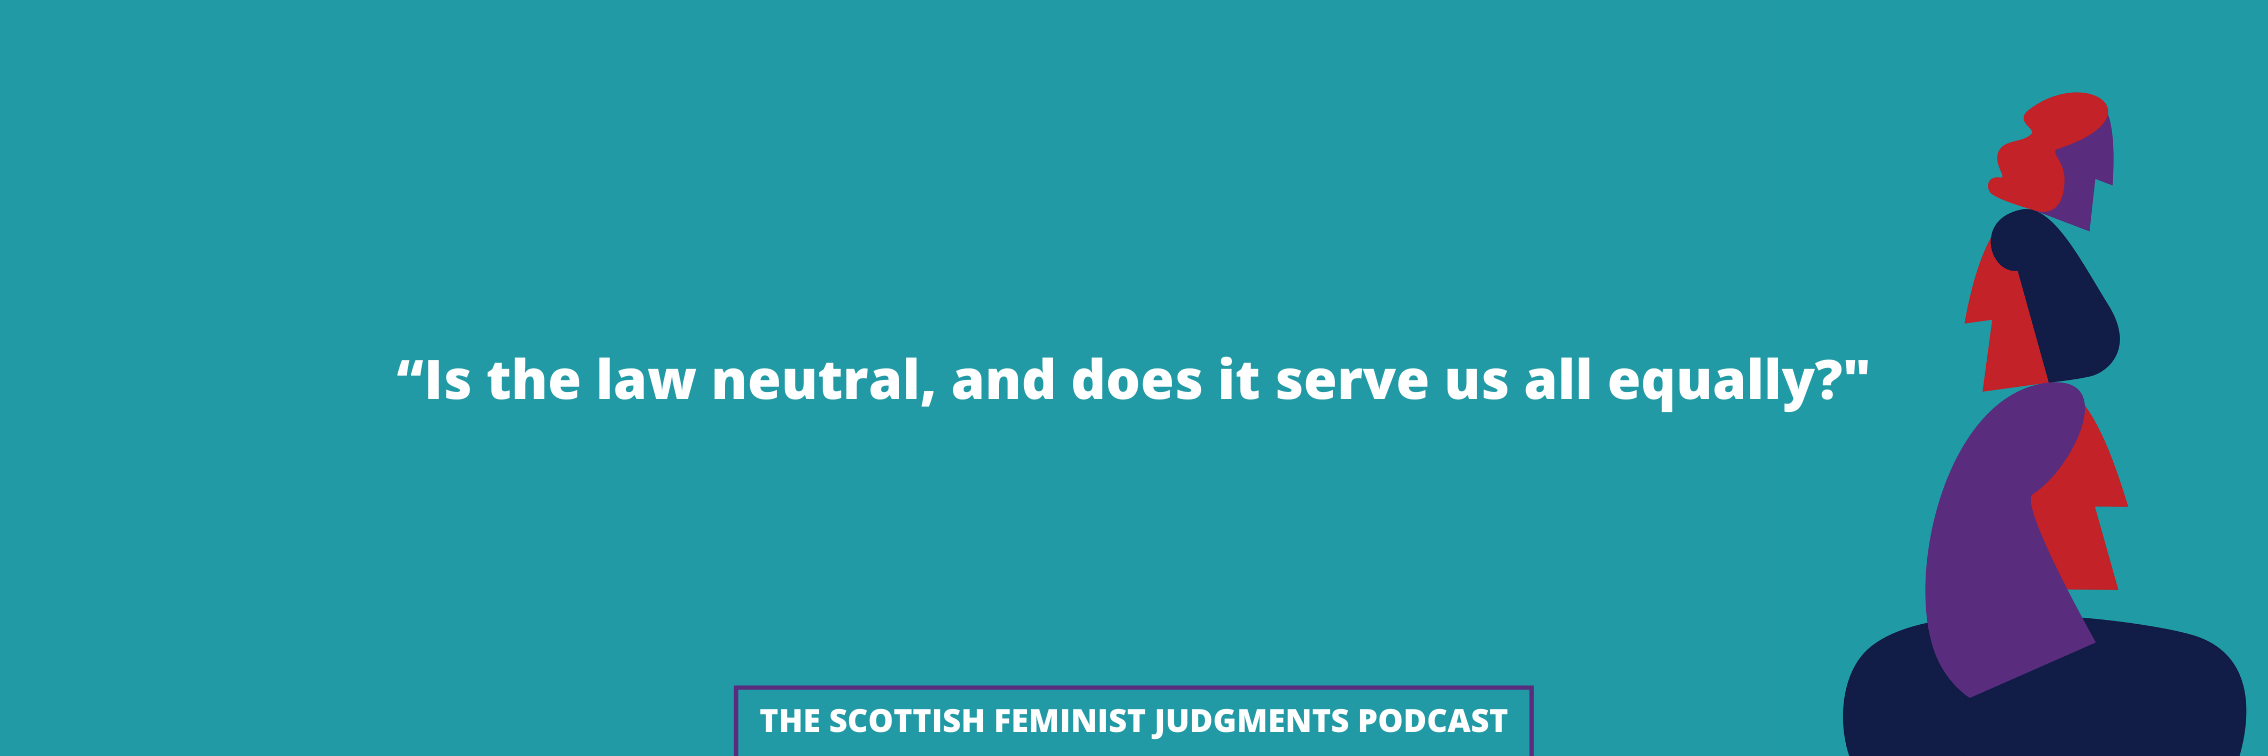 Is the law neutral, and does it serve us equally? Gabrielle Blackburn, The Scottish Feminist Judgments Podcast